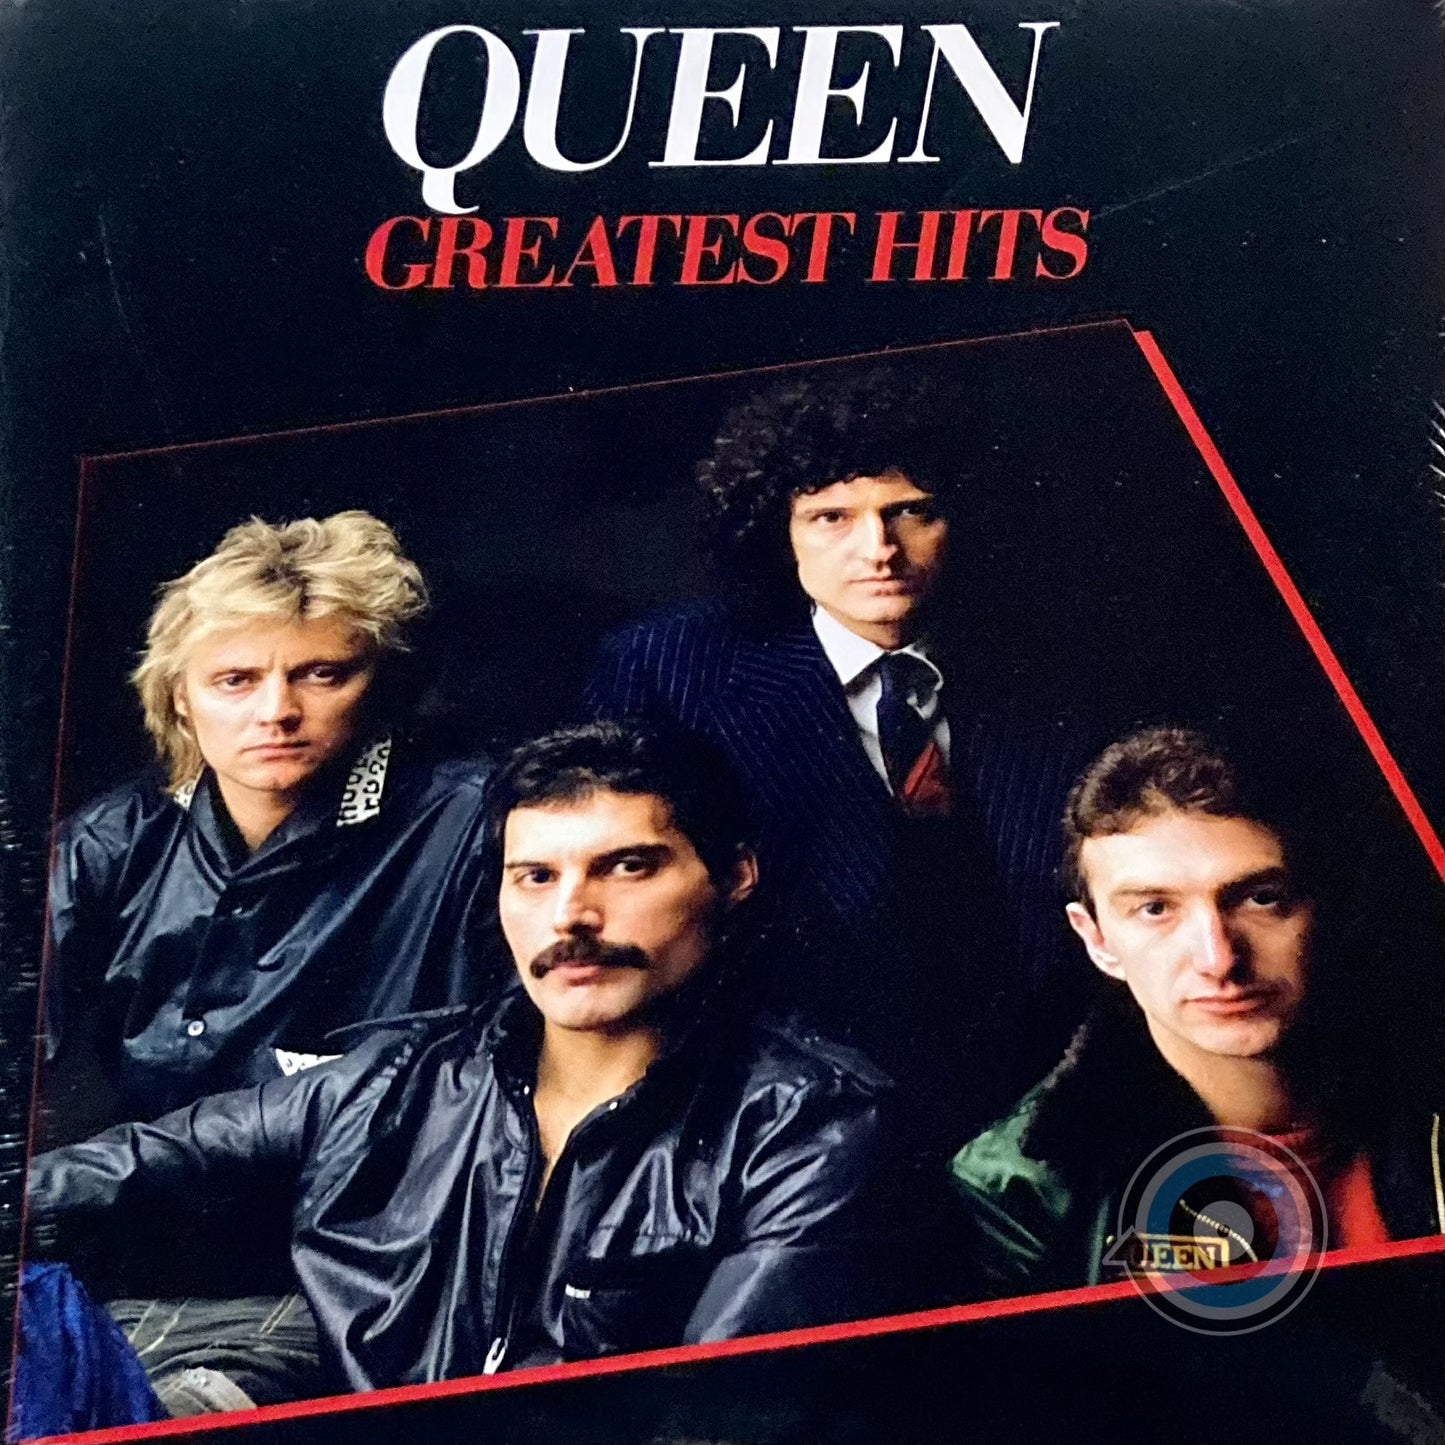 Queen - Greatest Hits 2-LP (Sealed)